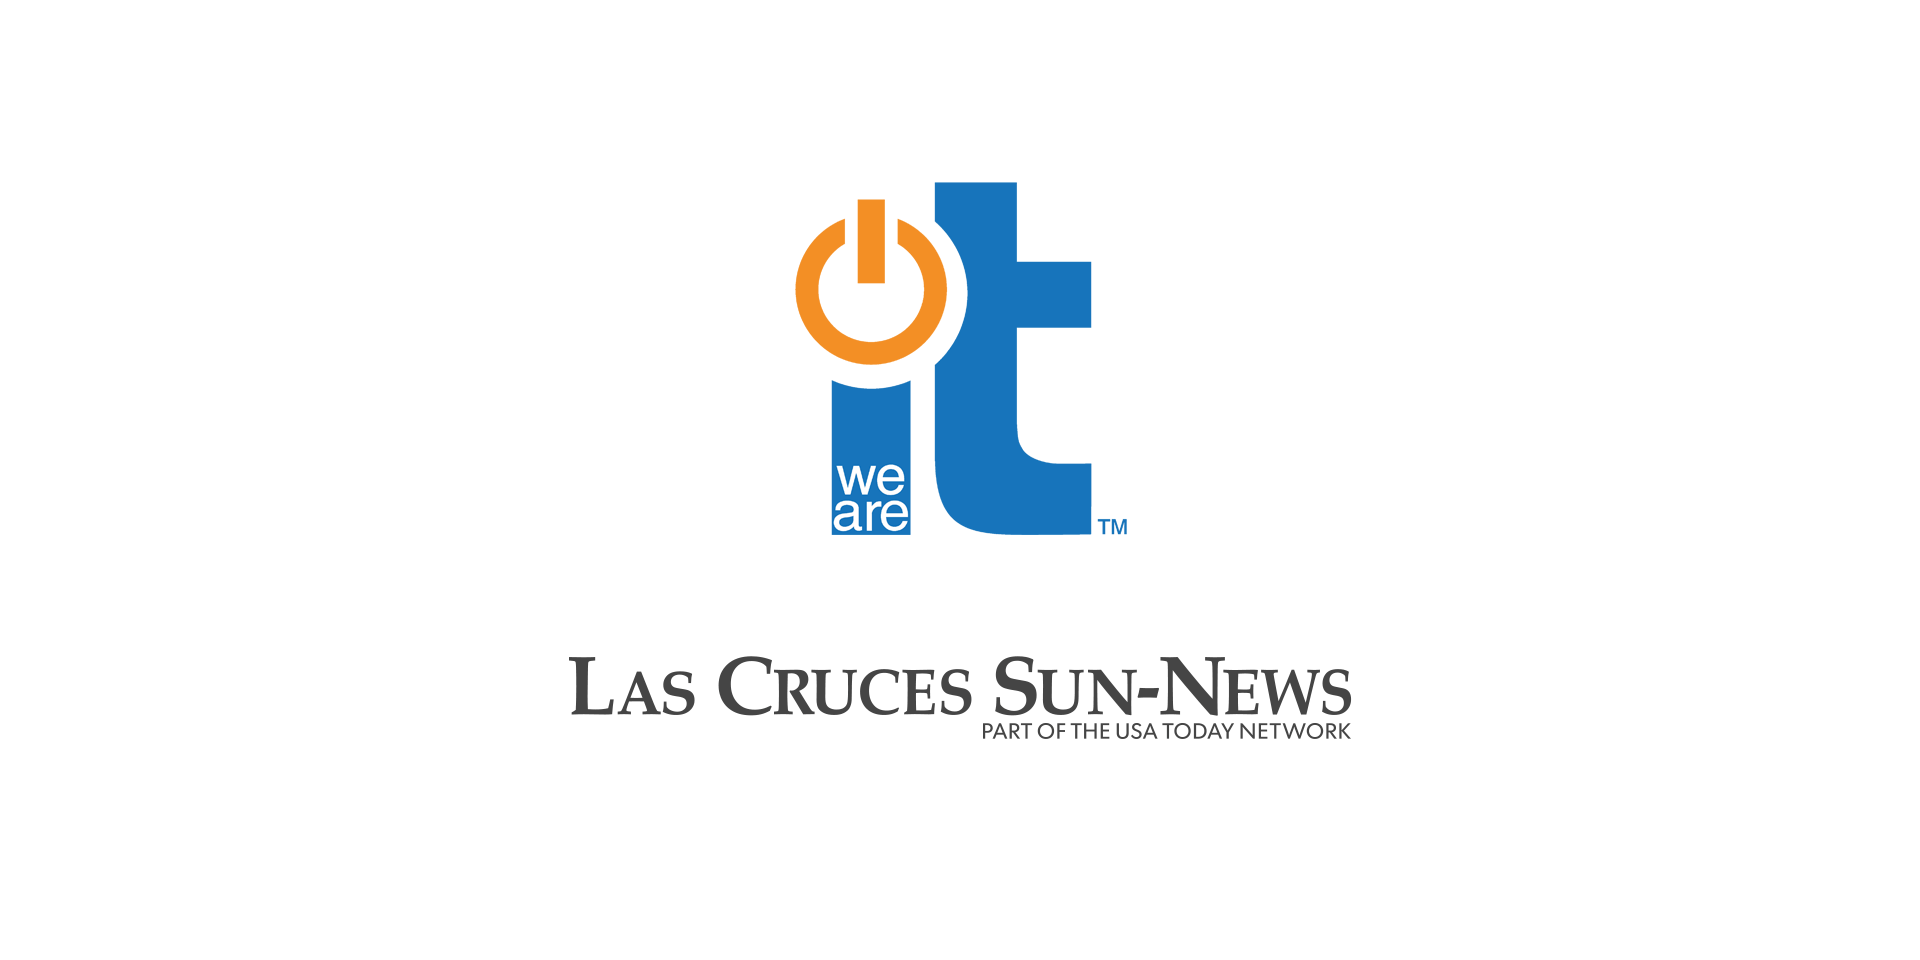 Information Technology Company Logo - Las Cruces Sun News We Are IT offers information technology services